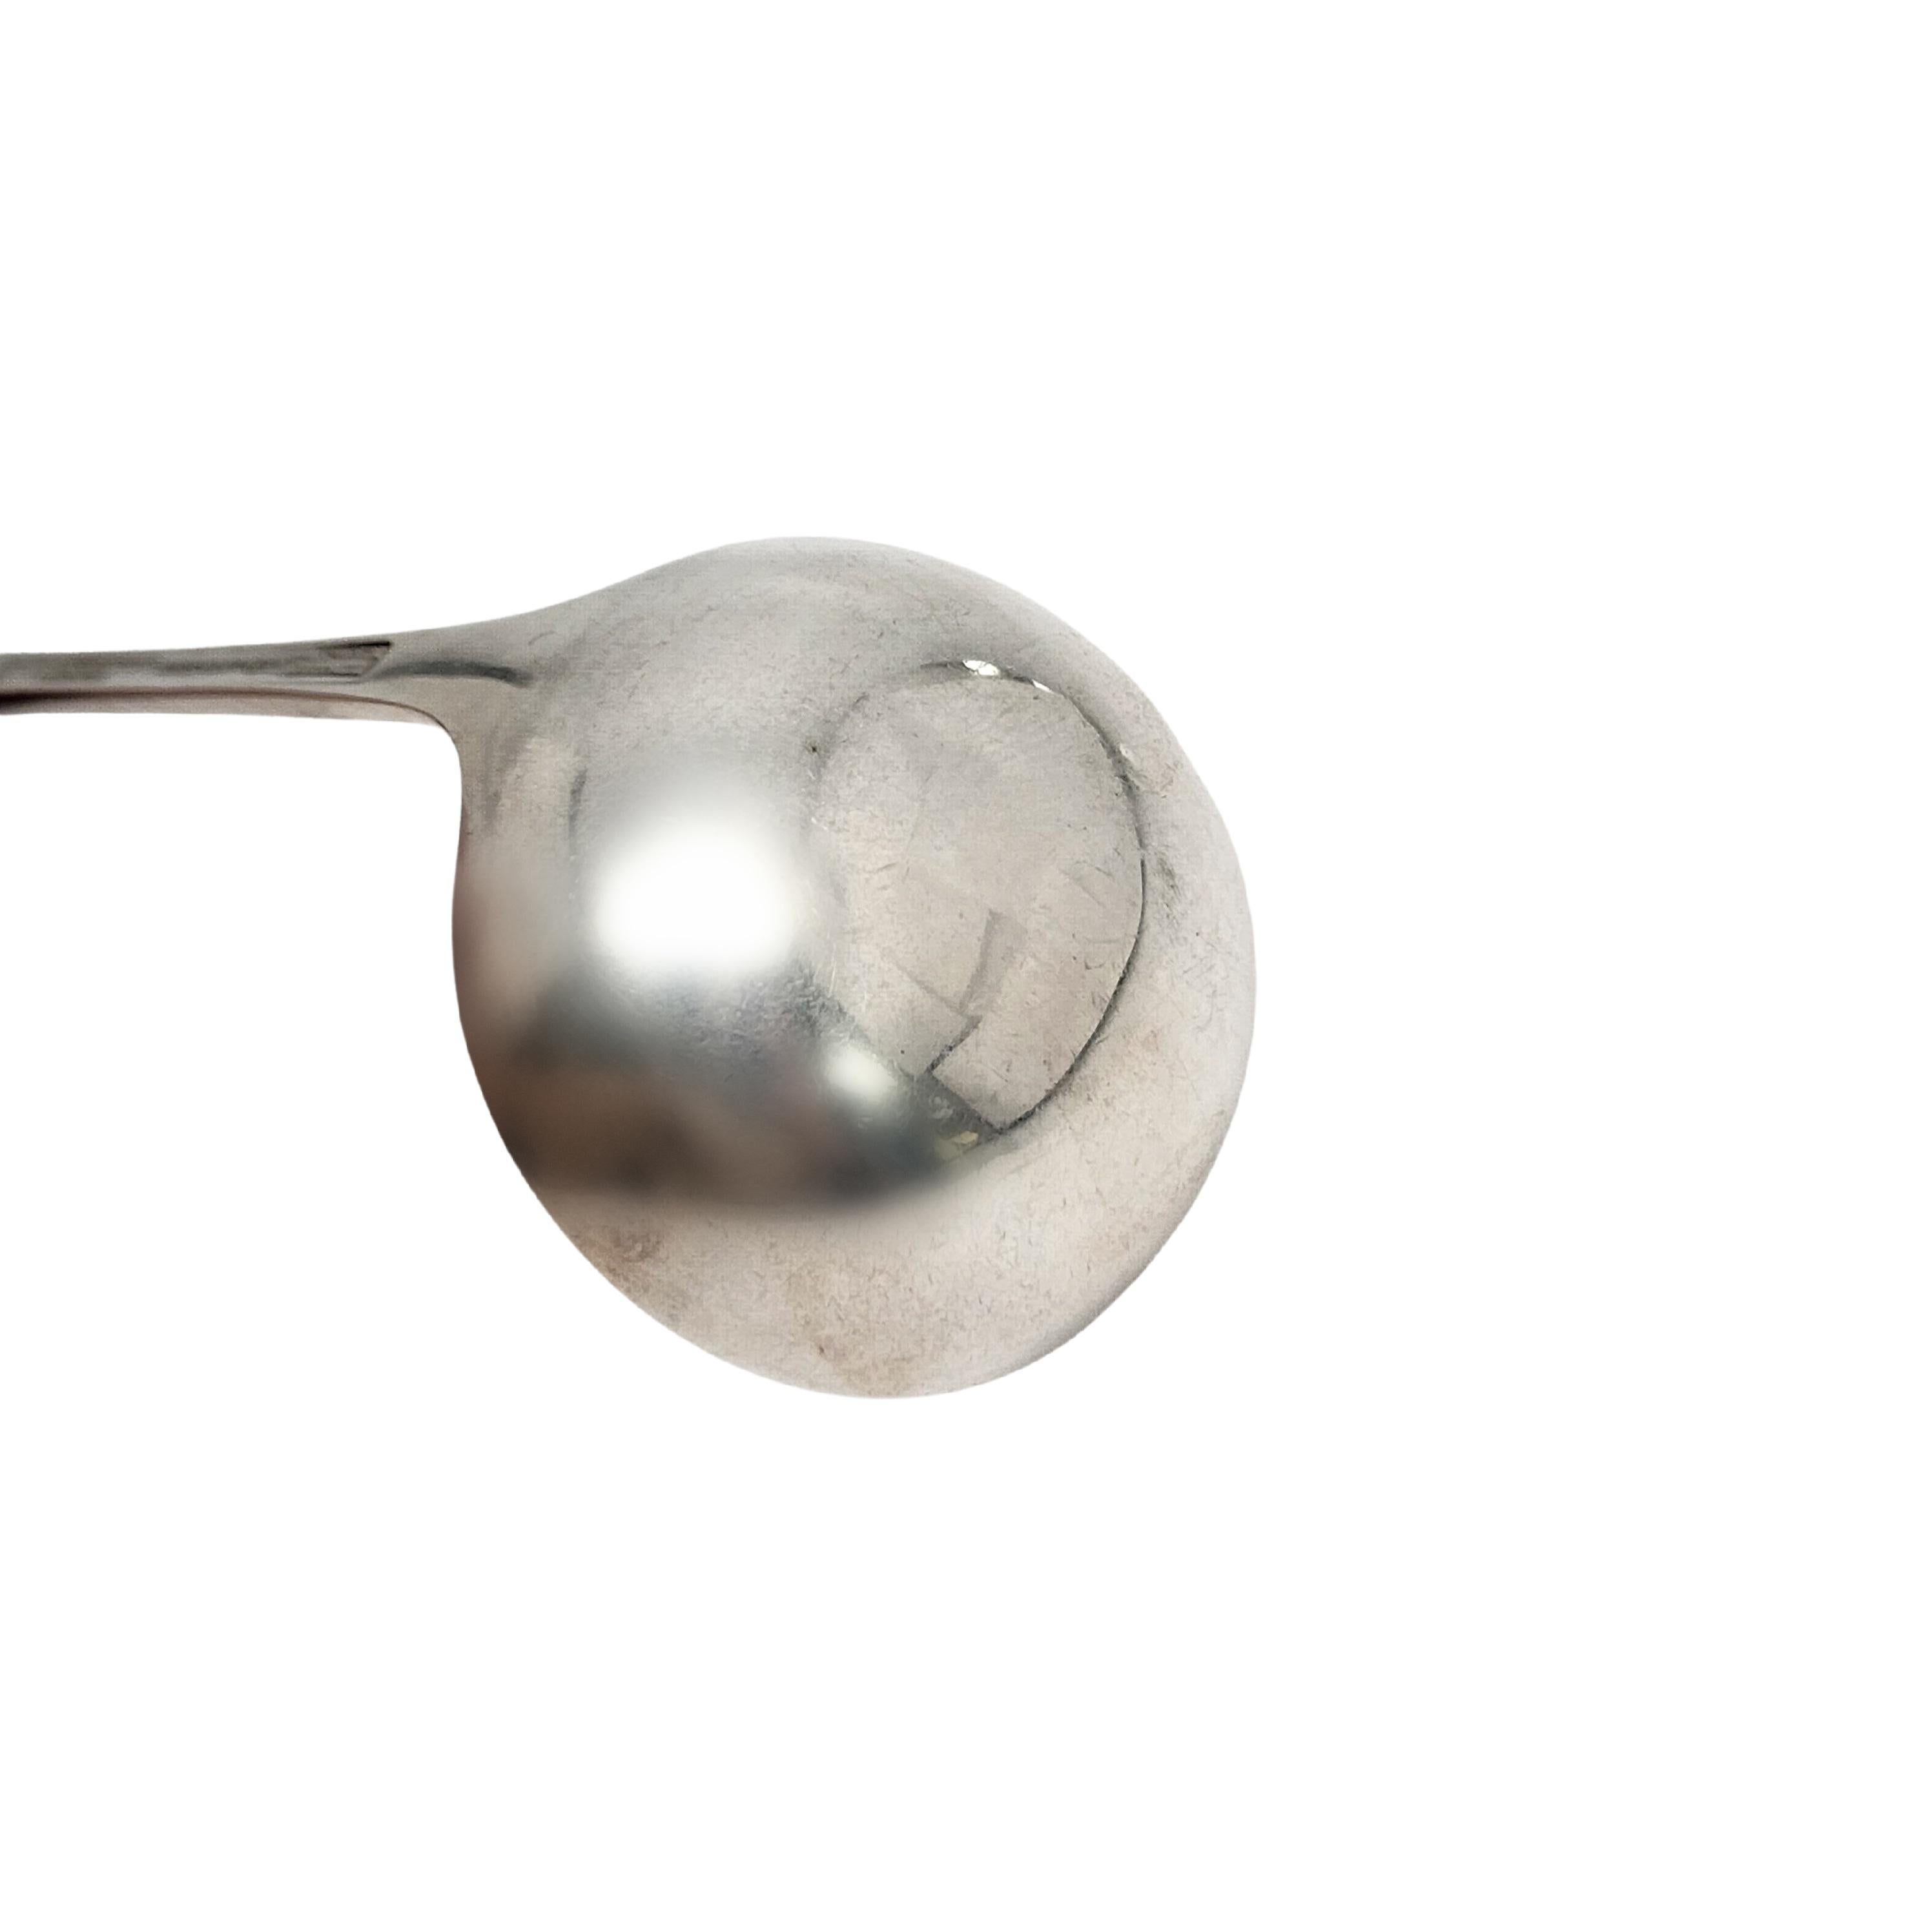 Tiffany & Co Sterling Silver Reproduction Edinborourgh Ladle (B) #13641 For Sale 3